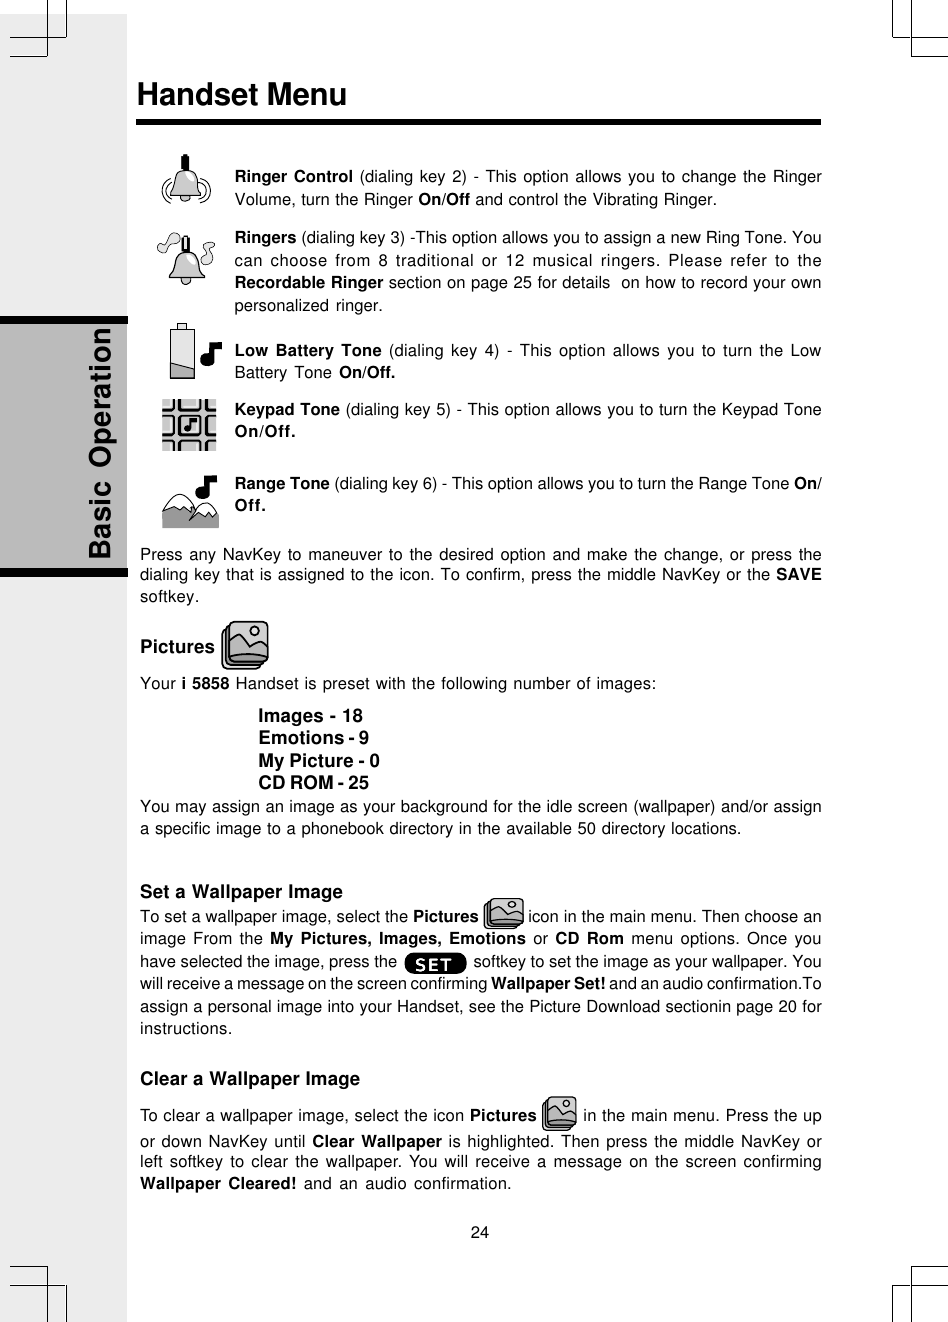 24Basic OperationRinger Control (dialing key 2) - This option allows you to change the RingerVolume, turn the Ringer On/Off and control the Vibrating Ringer.Ringers (dialing key 3) -This option allows you to assign a new Ring Tone. Youcan choose from 8 traditional or 12 musical ringers. Please refer to theRecordable Ringer section on page 25 for details  on how to record your ownpersonalized ringer.Low Battery Tone (dialing key 4) - This option allows you to turn the LowBattery Tone On/Off.Keypad Tone (dialing key 5) - This option allows you to turn the Keypad ToneOn/Off.Range Tone (dialing key 6) - This option allows you to turn the Range Tone On/Off.Press any NavKey to maneuver to the desired option and make the change, or press thedialing key that is assigned to the icon. To confirm, press the middle NavKey or the SAVEsoftkey.Pictures Your i 5858 Handset is preset with the following number of images:Images - 18Emotions - 9My Picture - 0CD ROM - 25You may assign an image as your background for the idle screen (wallpaper) and/or assigna specific image to a phonebook directory in the available 50 directory locations.Set a Wallpaper ImageTo set a wallpaper image, select the Pictures   icon in the main menu. Then choose animage From the My Pictures, Images, Emotions or CD Rom menu options. Once youhave selected the image, press the                 softkey to set the image as your wallpaper. Youwill receive a message on the screen confirming Wallpaper Set! and an audio confirmation.Toassign a personal image into your Handset, see the Picture Download sectionin page 20 forinstructions.Clear a Wallpaper ImageTo clear a wallpaper image, select the icon Pictures   in the main menu. Press the upor down NavKey until Clear Wallpaper is highlighted. Then press the middle NavKey orleft softkey to clear the wallpaper. You will receive a message on the screen confirmingWallpaper Cleared! and an audio confirmation.Handset MenuSETSETSETSETSET